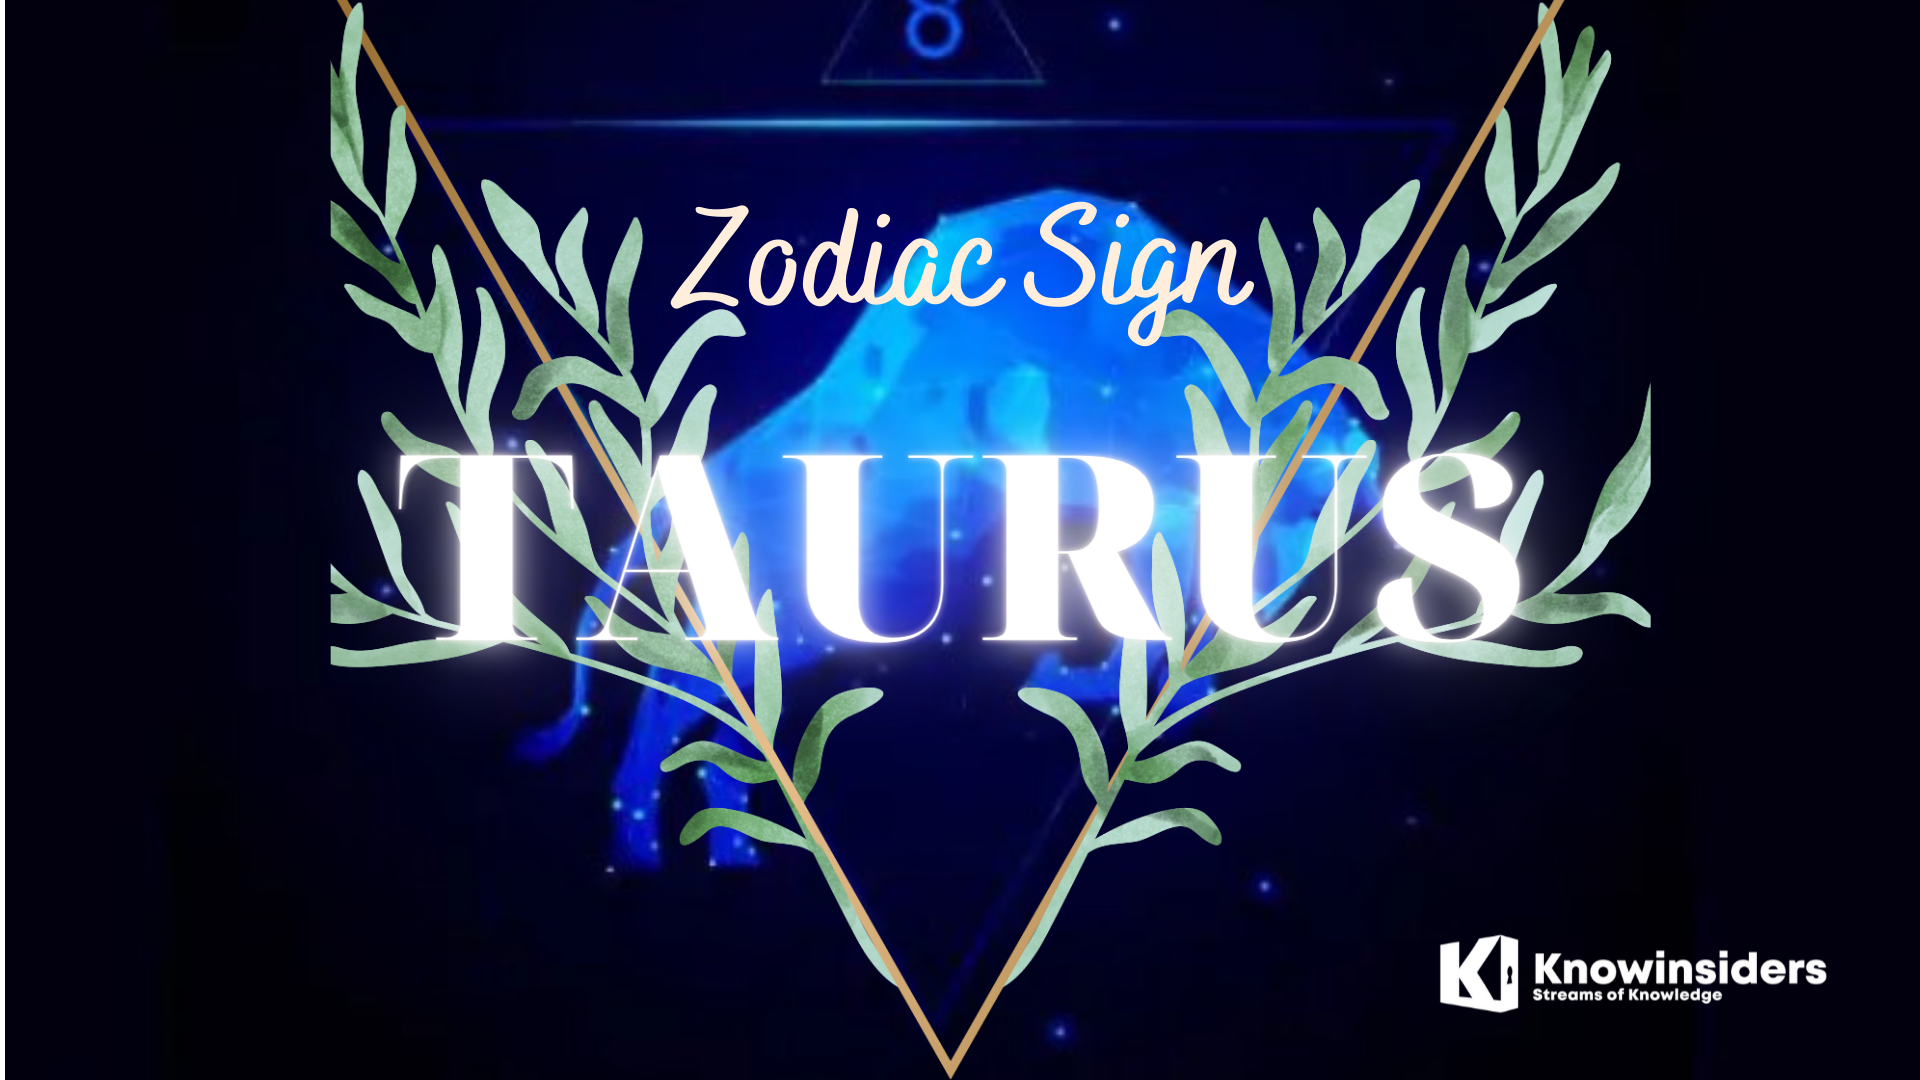 Top 5 Most Creative Zodiac Signs According To Astrology